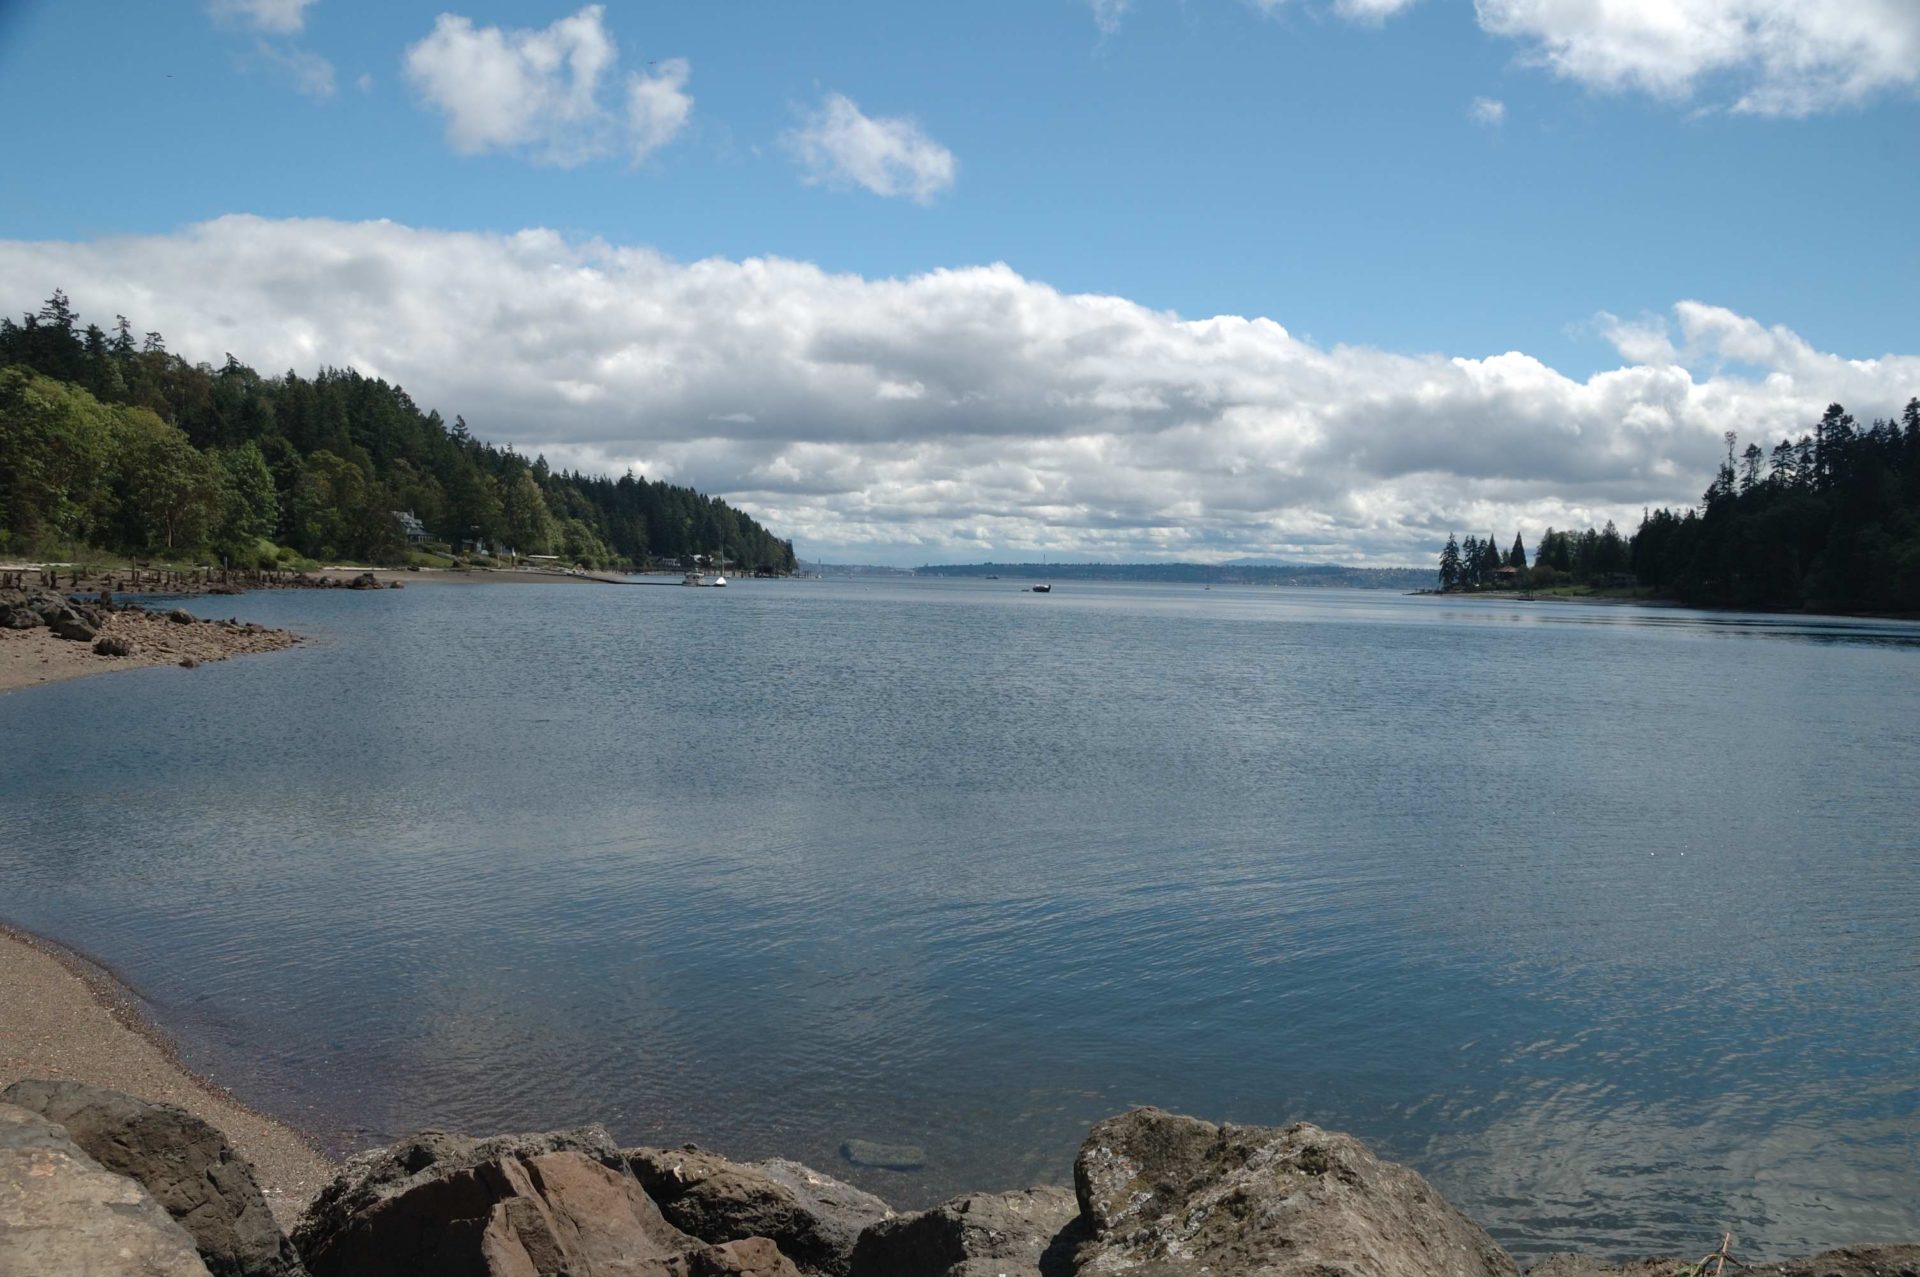 Blakely Harbor is a great getaway close to Seattle.